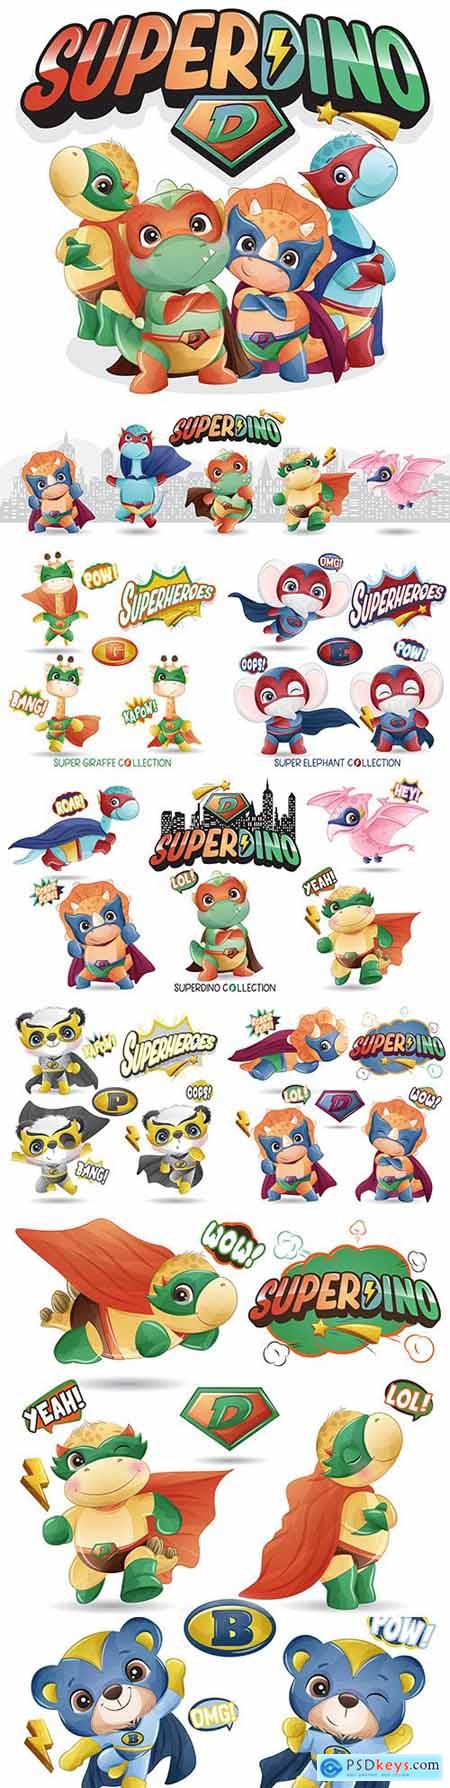 Super dinosaur and other heroes funny cartoon illustration